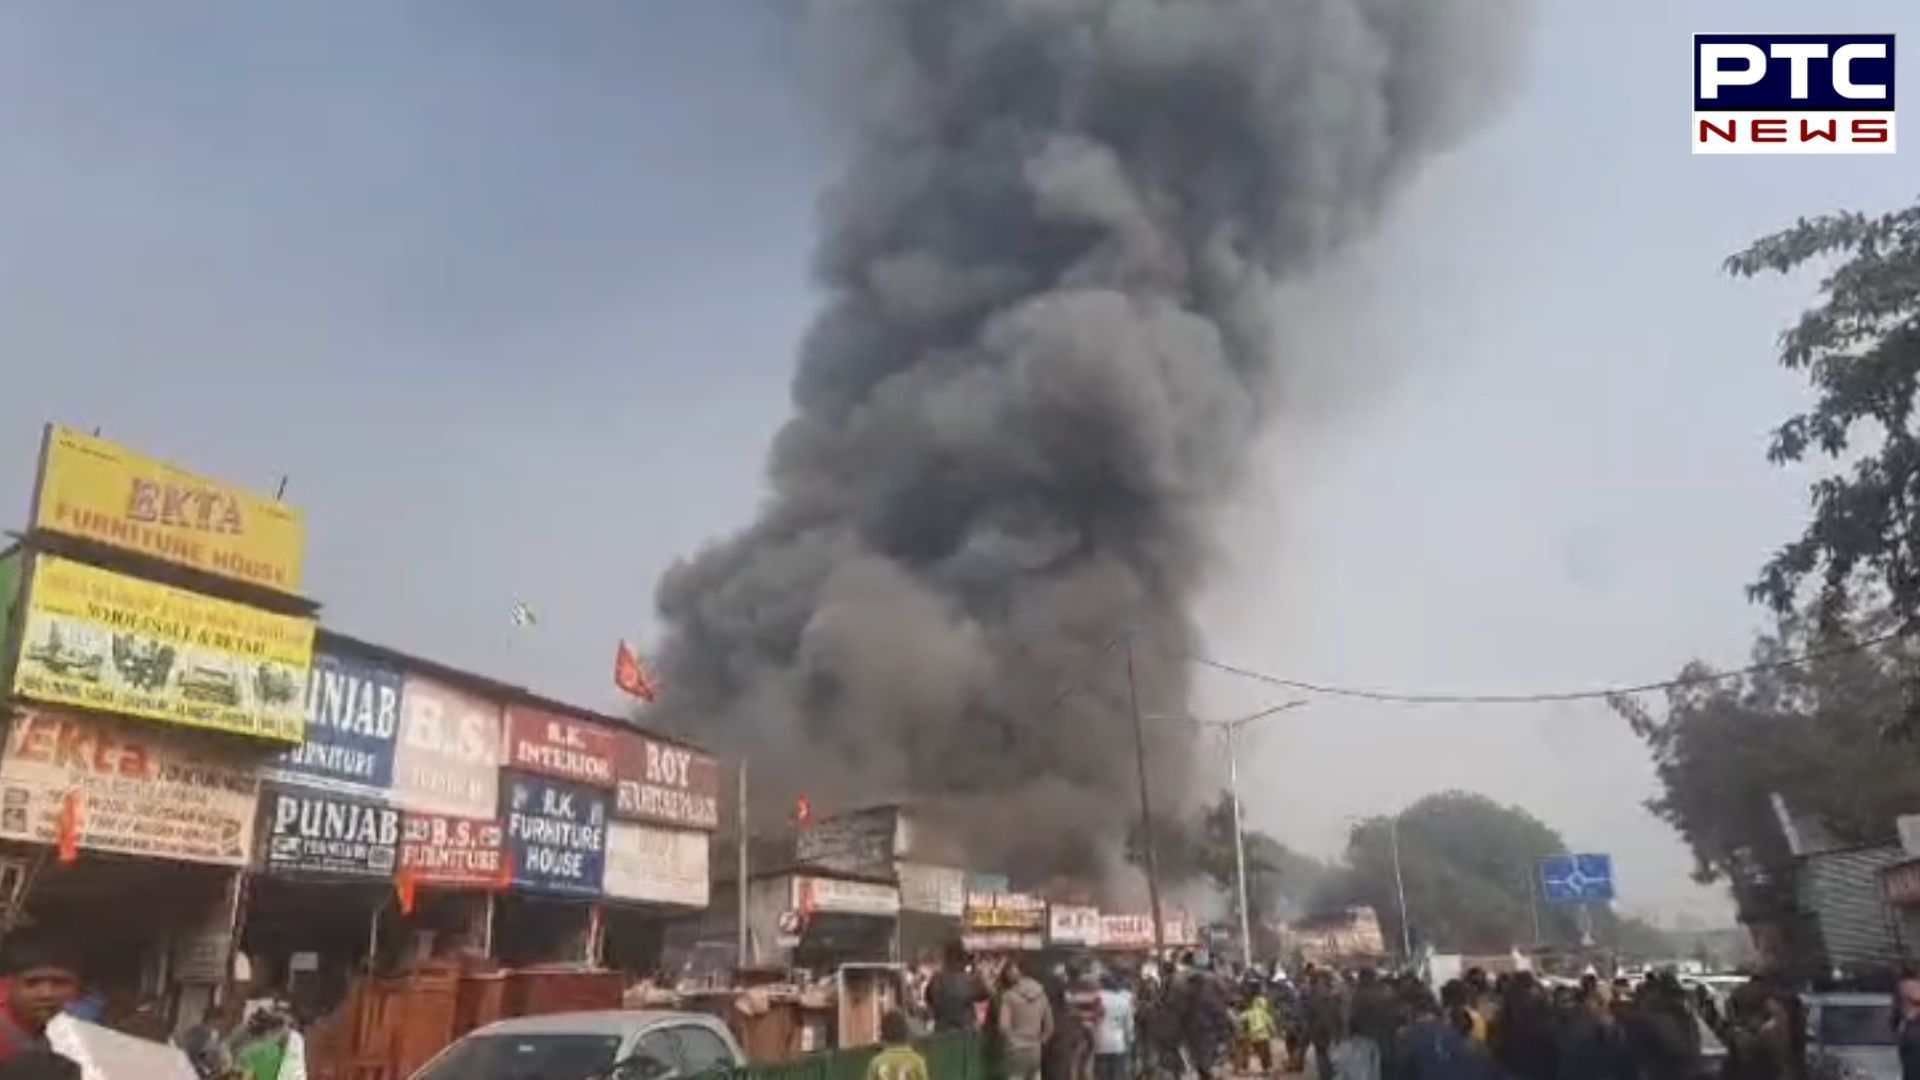 Chandigarh Fire: Massive fire breaks out in furniture market, several shops gutted, watch visuals